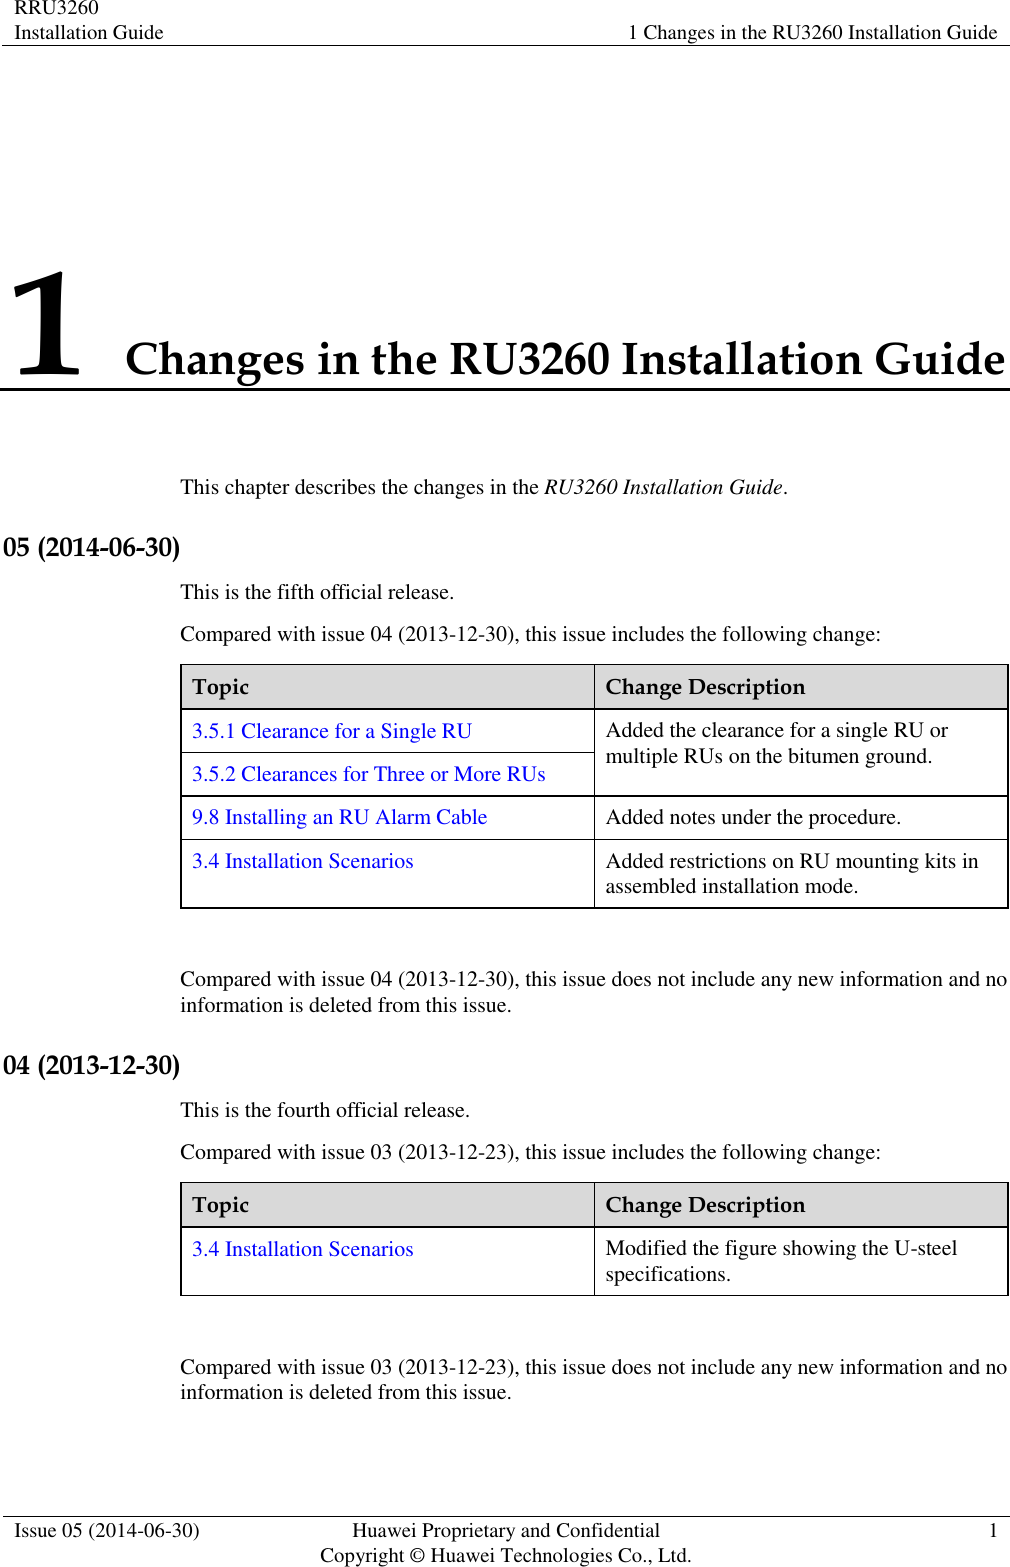 RRU3260 Installation Guide 1 Changes in the RU3260 Installation Guide  Issue 05 (2014-06-30) Huawei Proprietary and Confidential                                     Copyright © Huawei Technologies Co., Ltd. 1  1 Changes in the RU3260 Installation Guide This chapter describes the changes in the RU3260 Installation Guide. 05 (2014-06-30) This is the fifth official release. Compared with issue 04 (2013-12-30), this issue includes the following change: Topic Change Description 3.5.1 Clearance for a Single RU Added the clearance for a single RU or multiple RUs on the bitumen ground. 3.5.2 Clearances for Three or More RUs 9.8 Installing an RU Alarm Cable Added notes under the procedure. 3.4 Installation Scenarios Added restrictions on RU mounting kits in assembled installation mode.  Compared with issue 04 (2013-12-30), this issue does not include any new information and no information is deleted from this issue. 04 (2013-12-30) This is the fourth official release. Compared with issue 03 (2013-12-23), this issue includes the following change: Topic Change Description 3.4 Installation Scenarios Modified the figure showing the U-steel specifications.  Compared with issue 03 (2013-12-23), this issue does not include any new information and no information is deleted from this issue. 